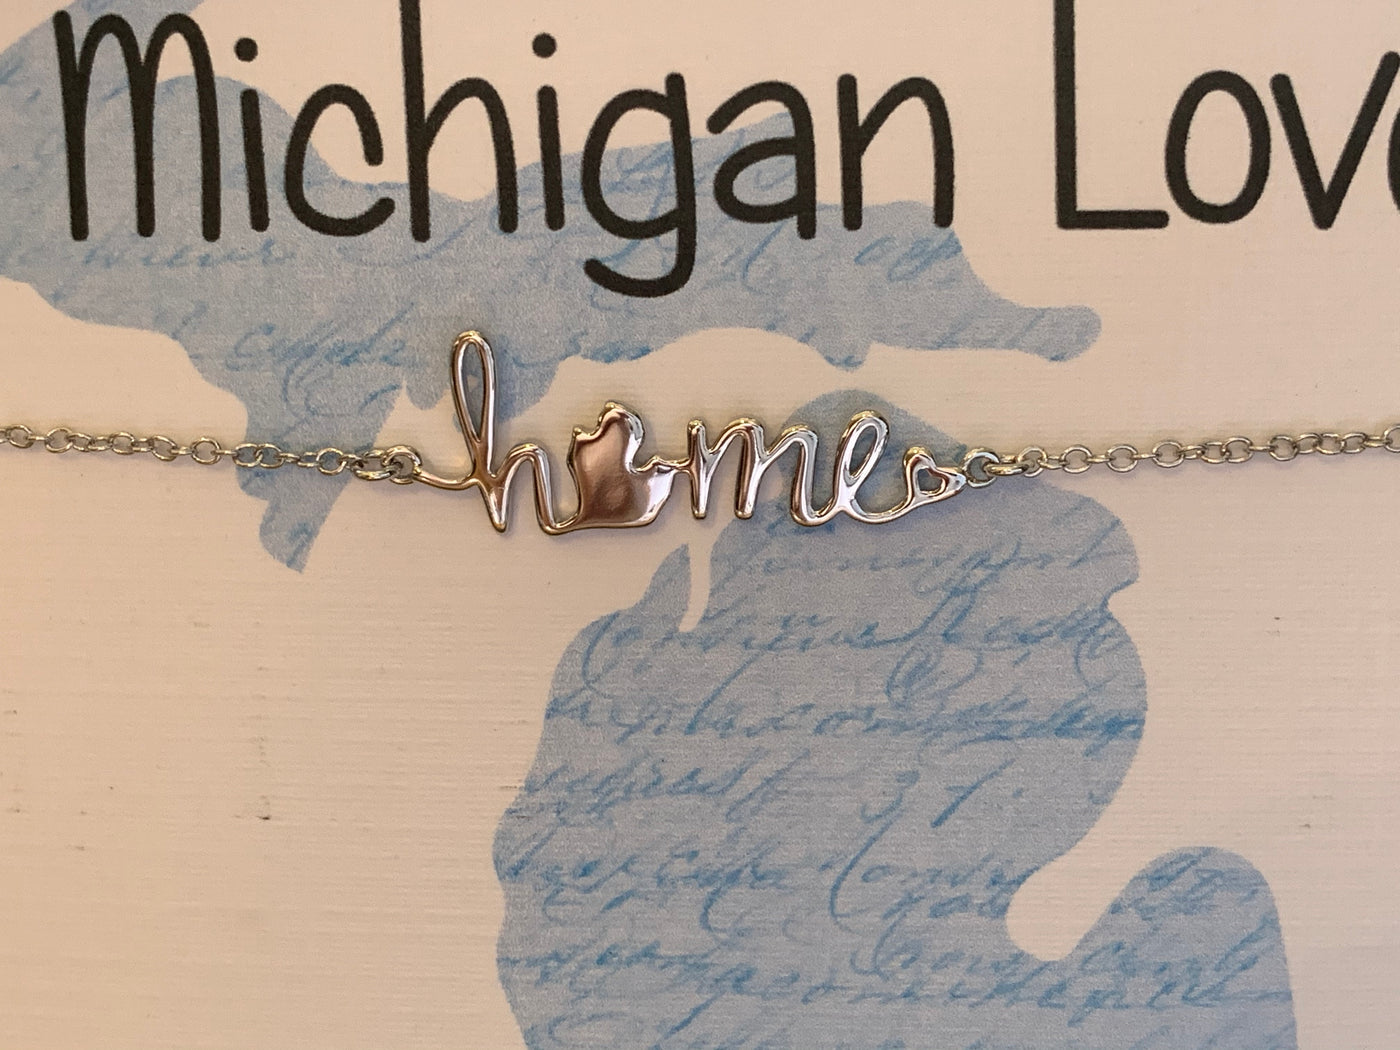 Michigan Home Necklace - Jill's Jewels | Unique, Handcrafted, Trendy, And Fun Jewelry